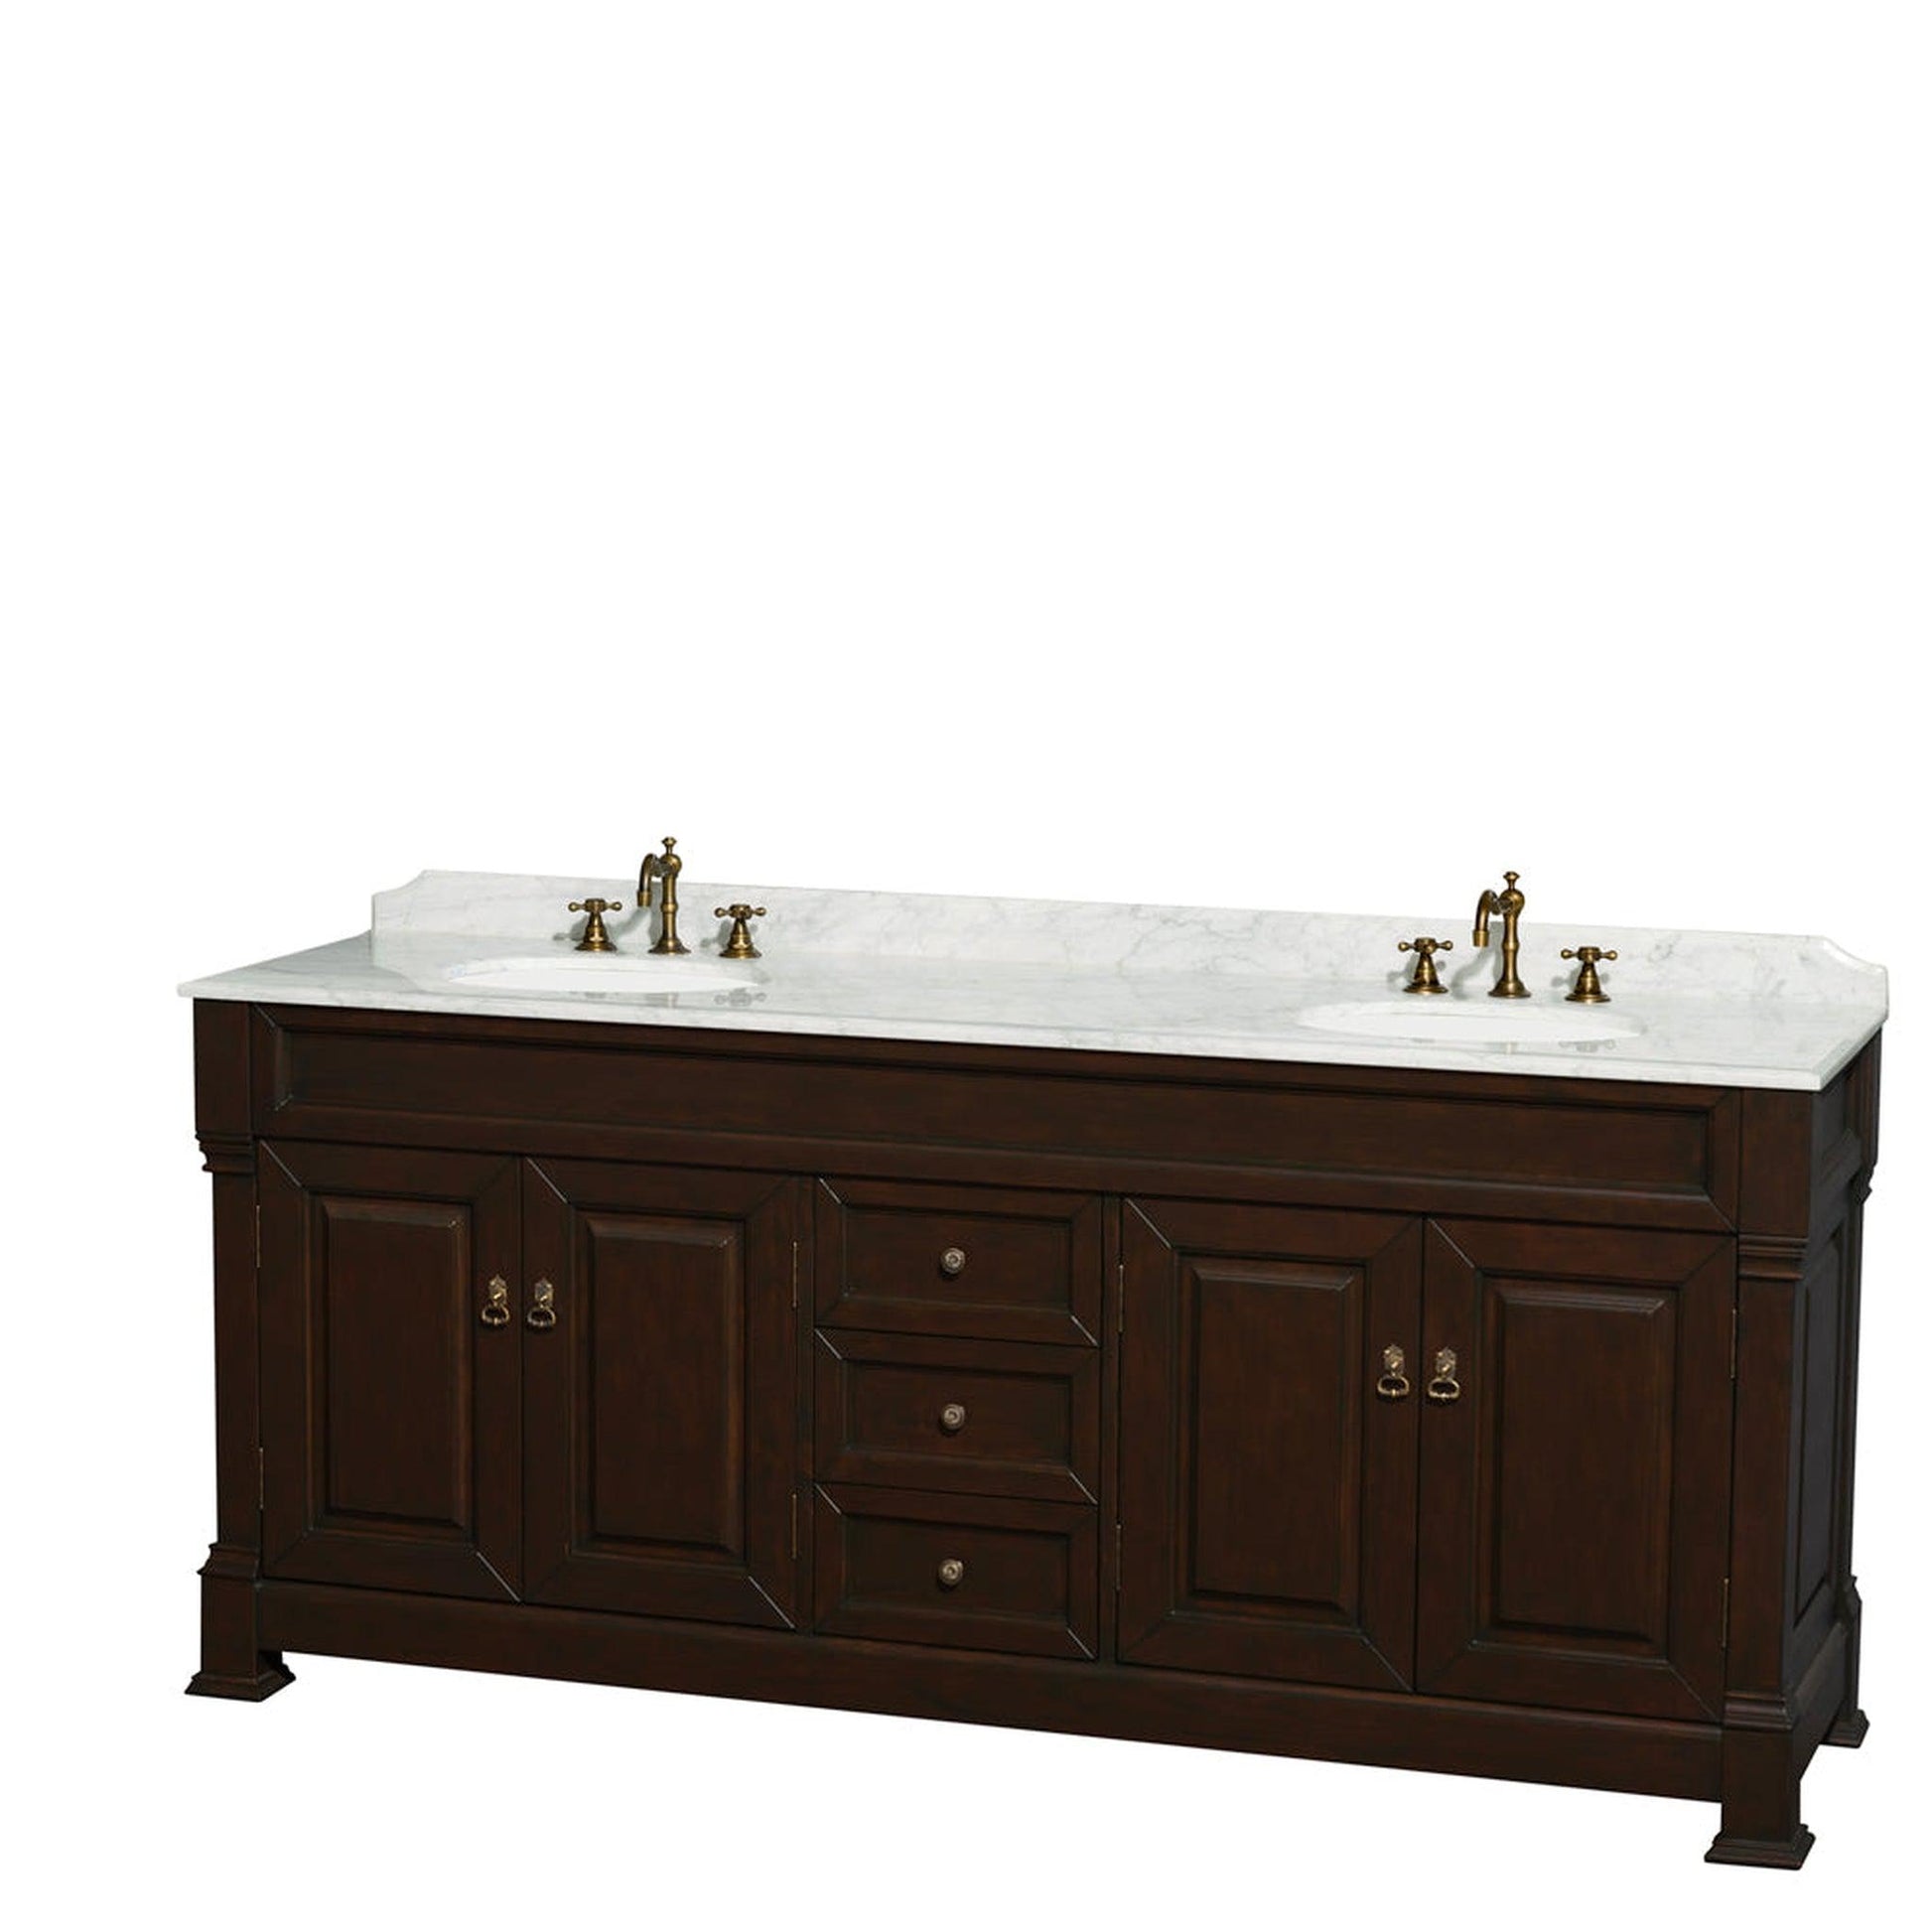 Wyndham Collection Andover 80" Double Bathroom Vanity in Dark Cherry With White Carrara Marble Countertop & Undermount Oval Sink